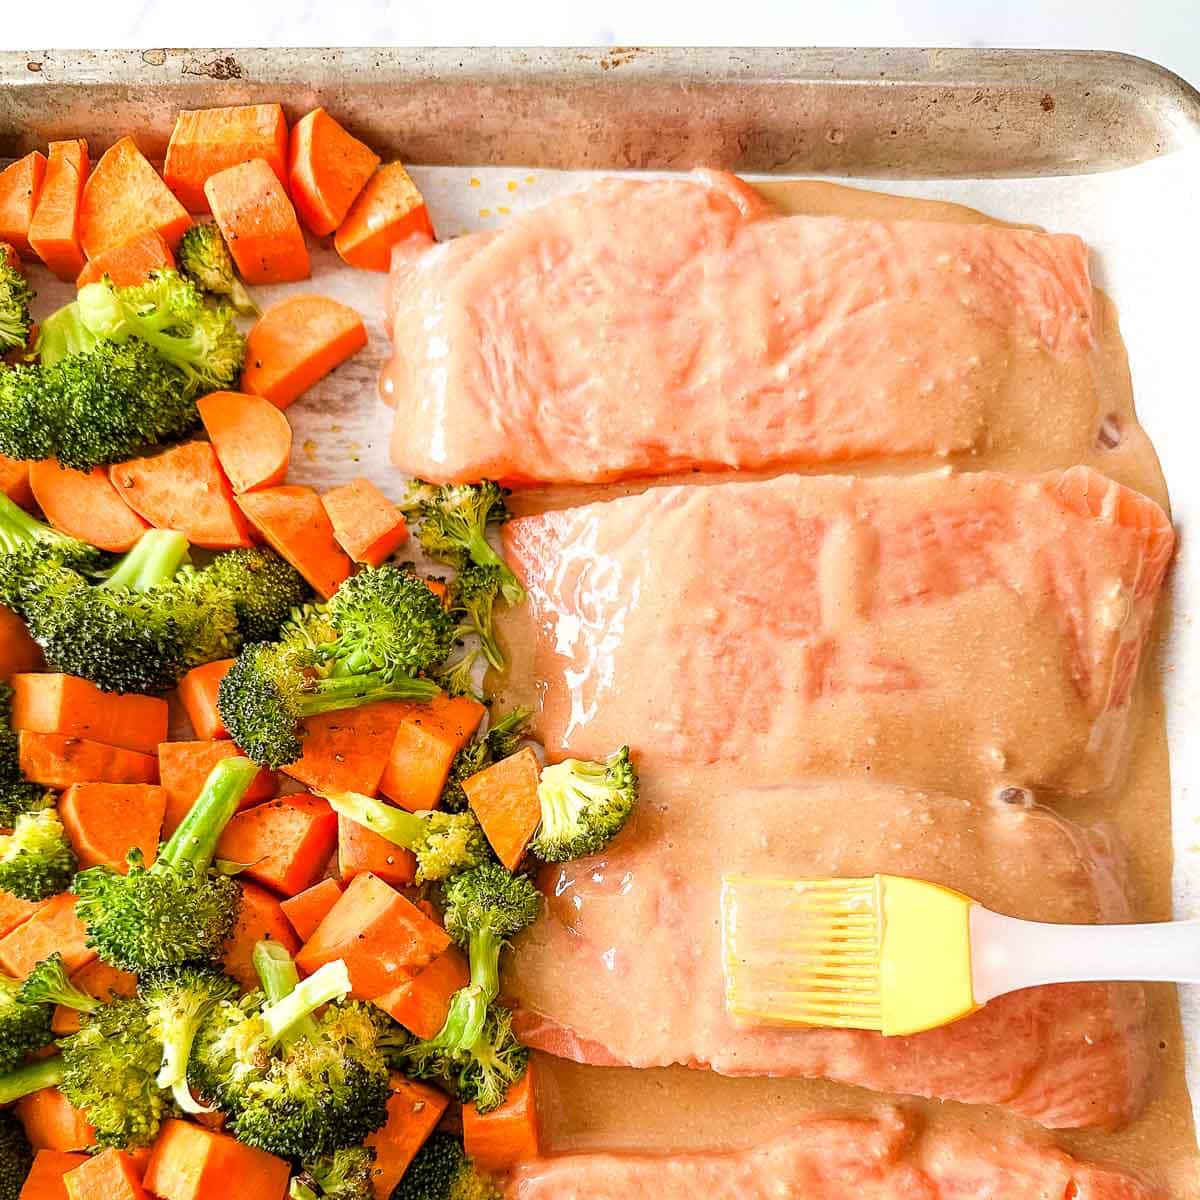 Maple dijon salmon is brushed with sauce beside cubed sweet potatoes and broccoli florets.